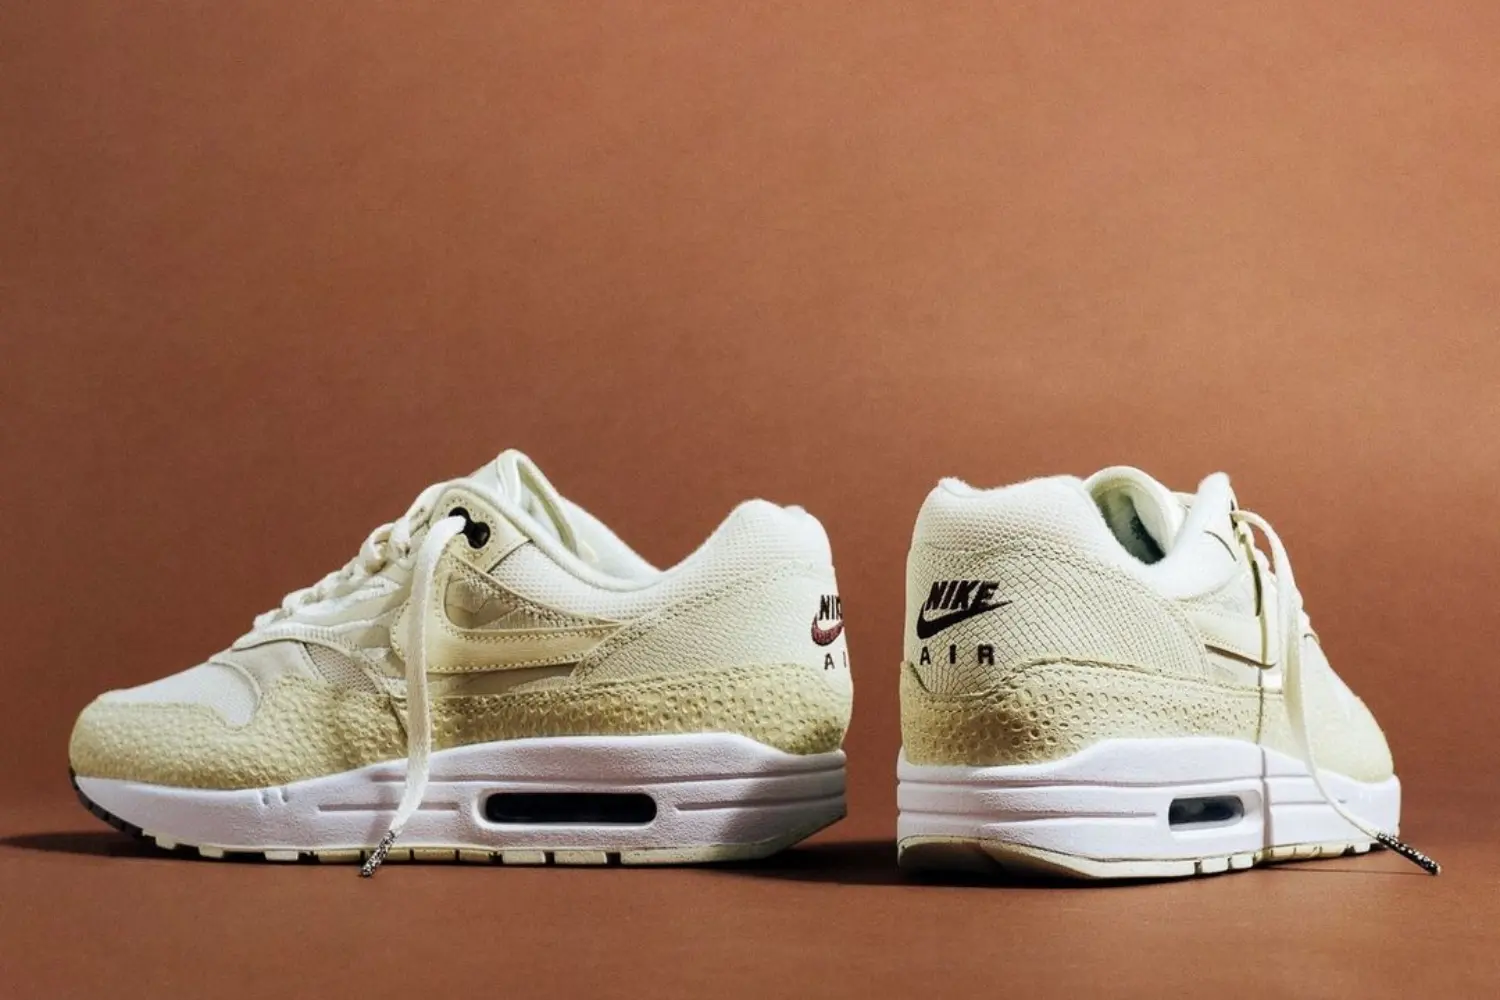 Score the Nike Air Max 1 with 30% discount at Solebox